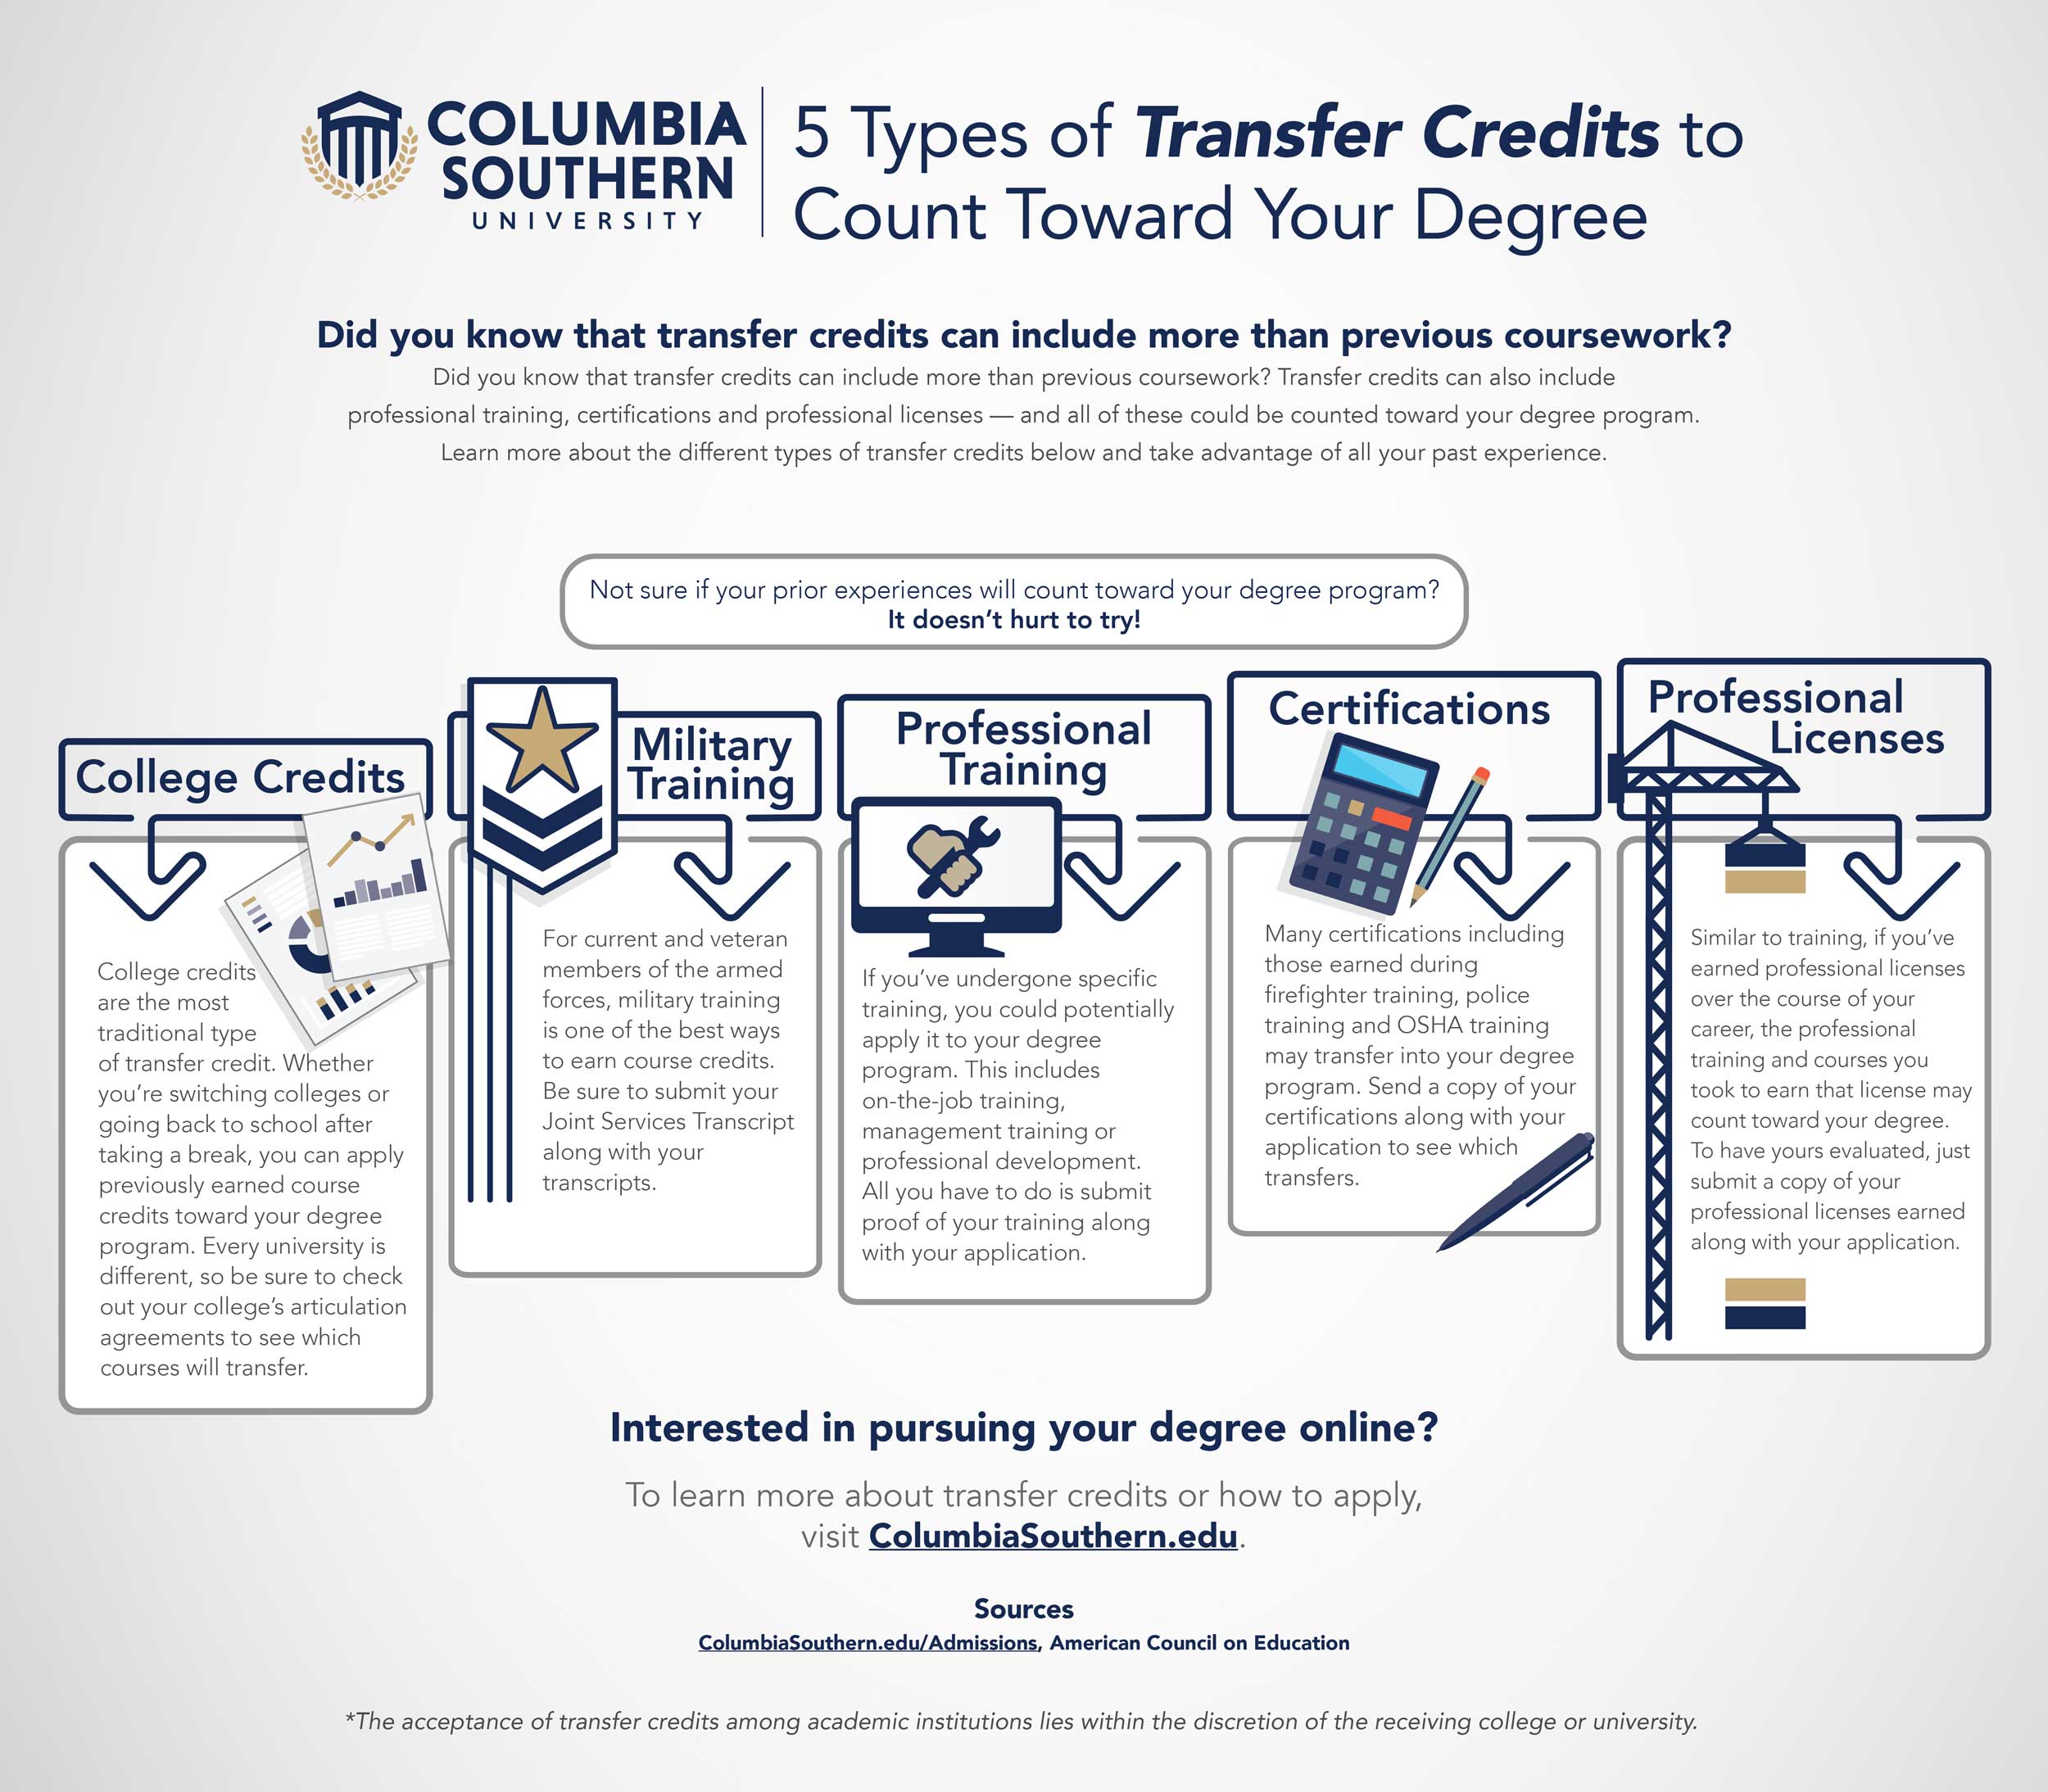 Infographic displaying 5 types of transfer credits that count toward your degree